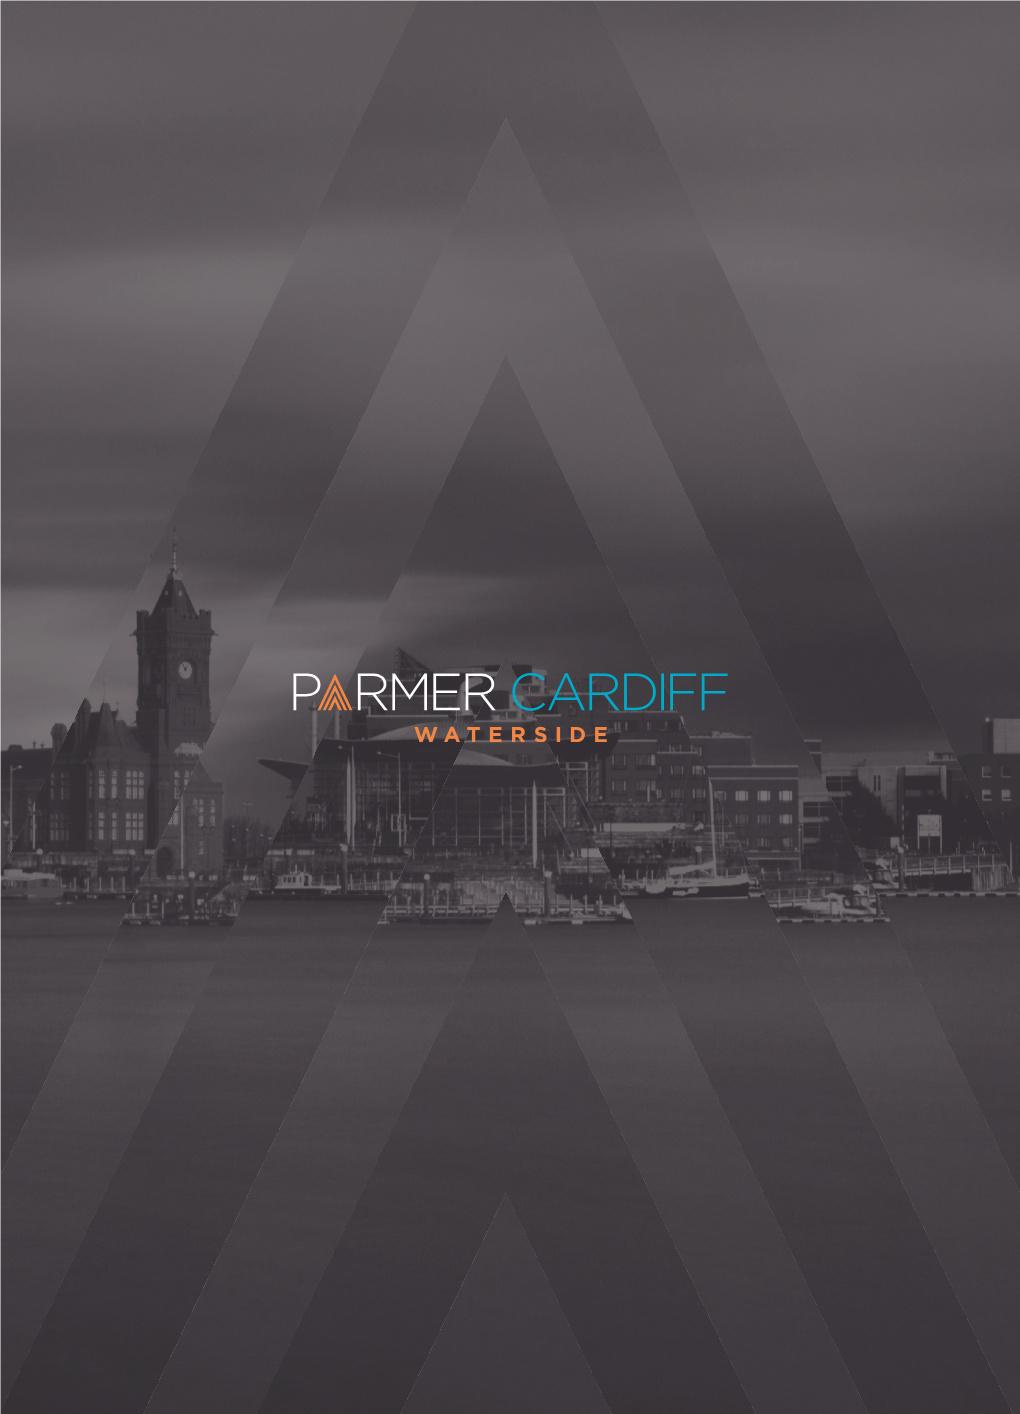 At the Heart of Cardiff Bay 18–24 Parmer Cardiff Waterside – Cardiff Bay – Properties – Contact